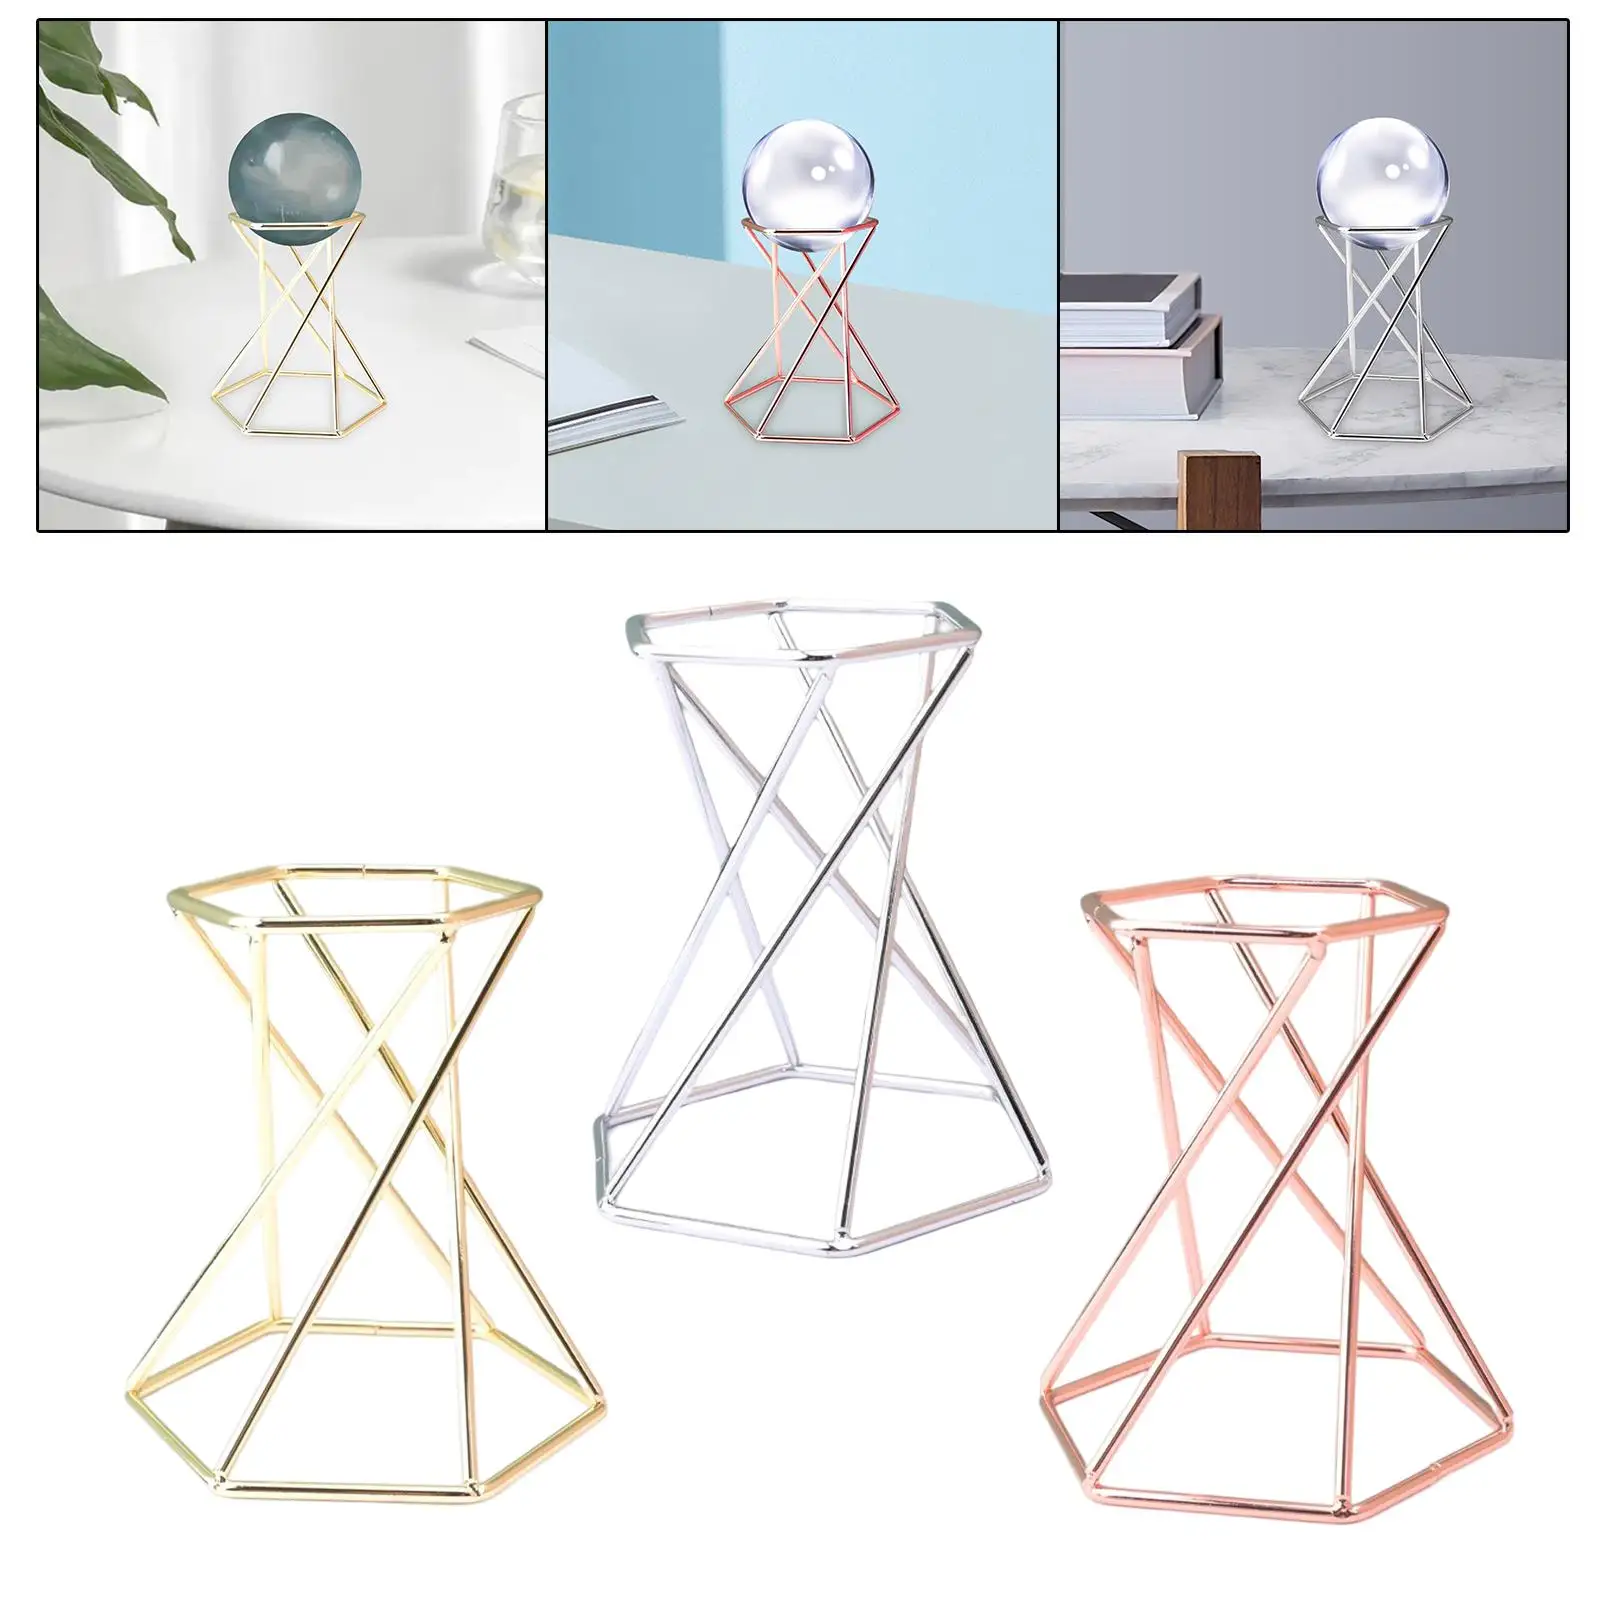 Display Stand Beautiful Display Multifunctional Sturdy Ball Holder for Antique Stores Jewelry Stores Office Indoor Friend